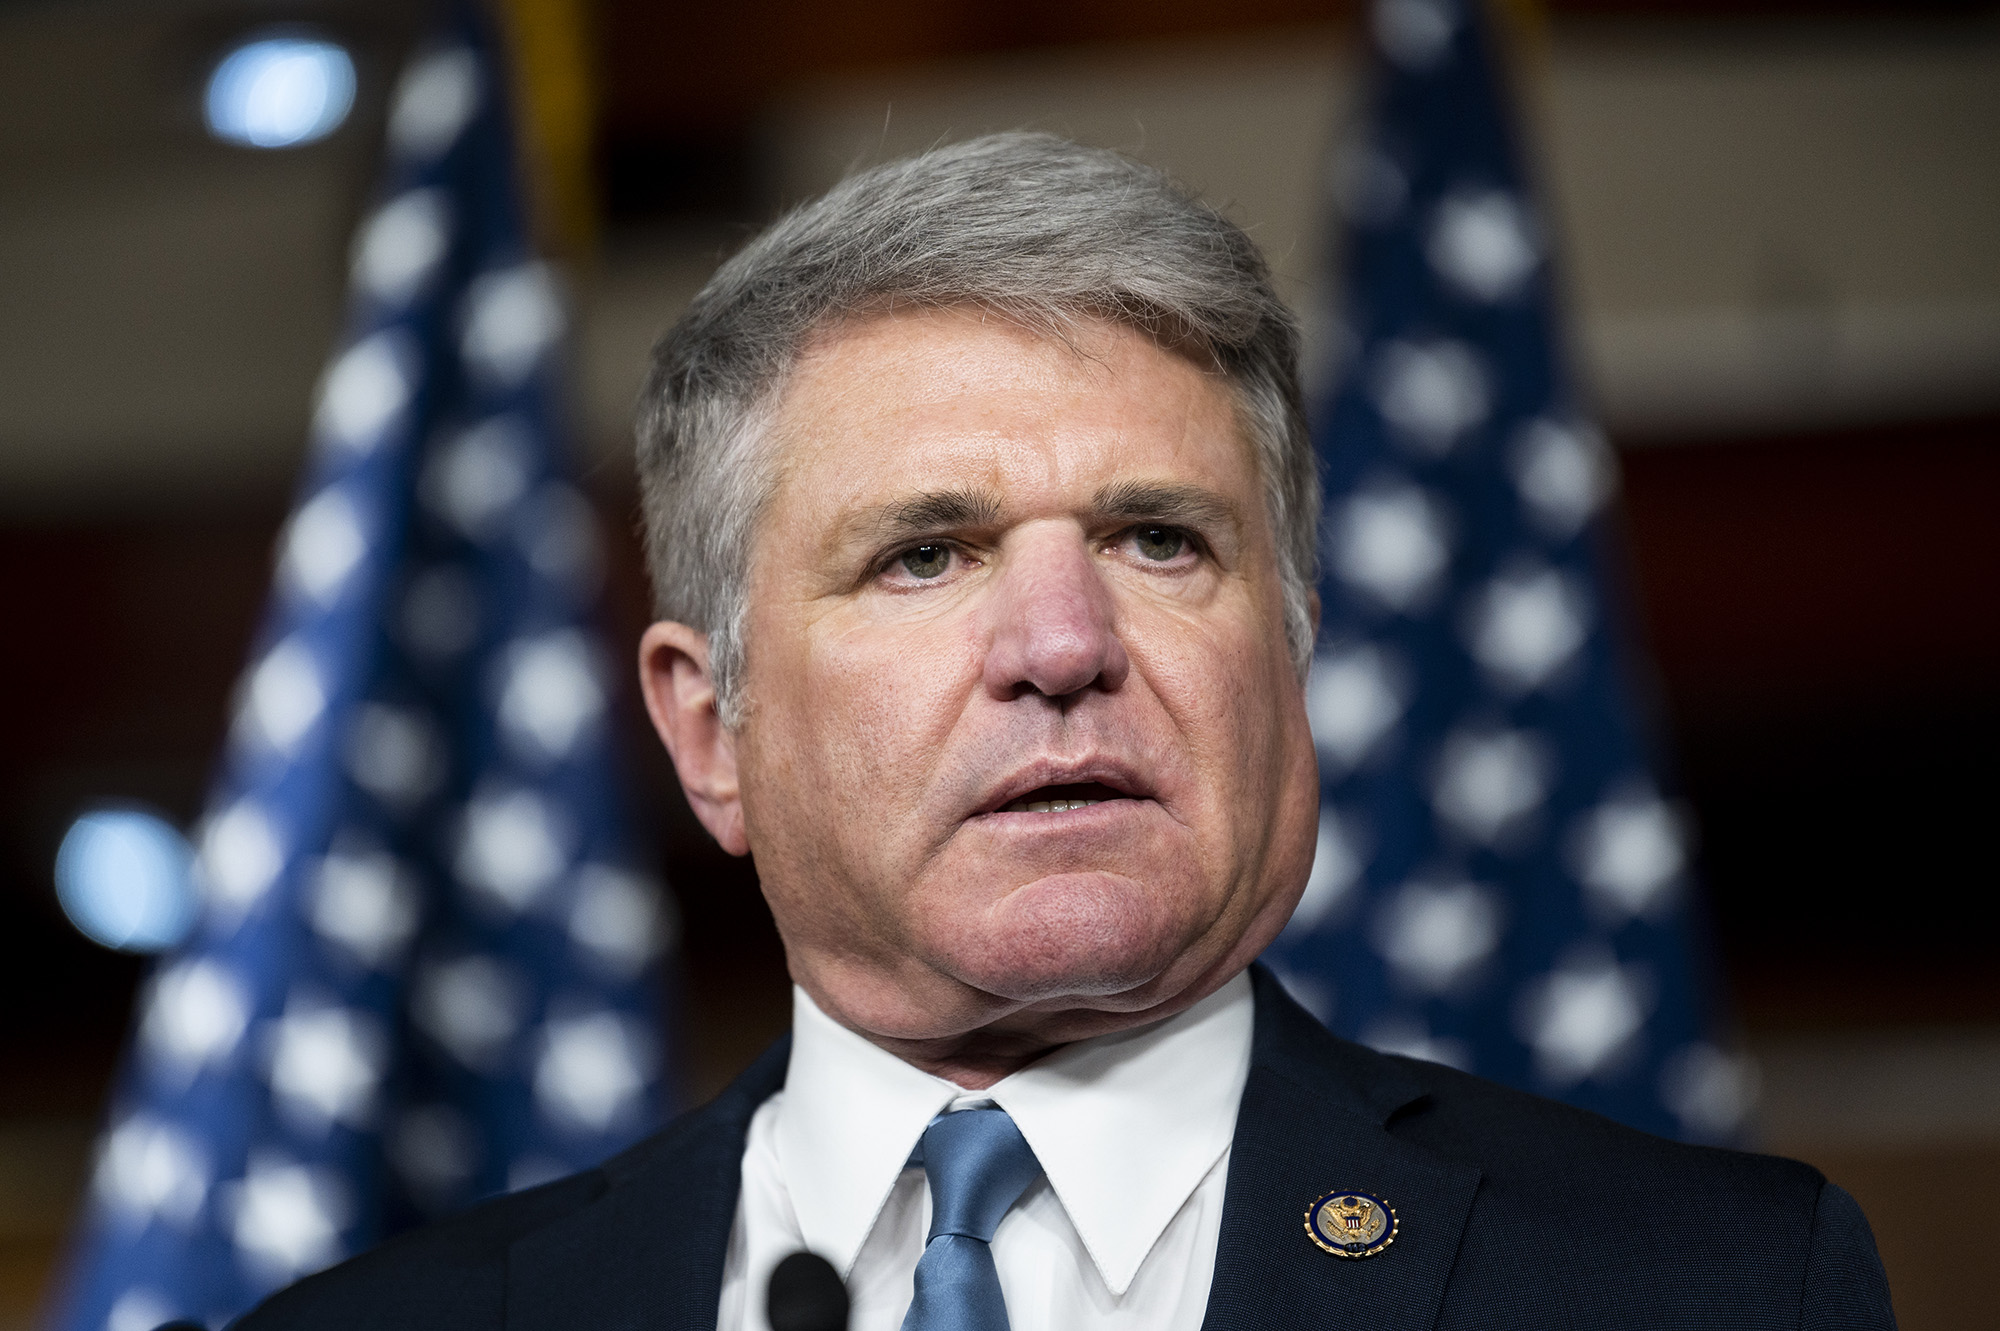 Rep. Michael McCaul, R-Texas, participates in the House Republicans news conference following the House Republican Conference meeting in the Capitol on February 2, 2022.